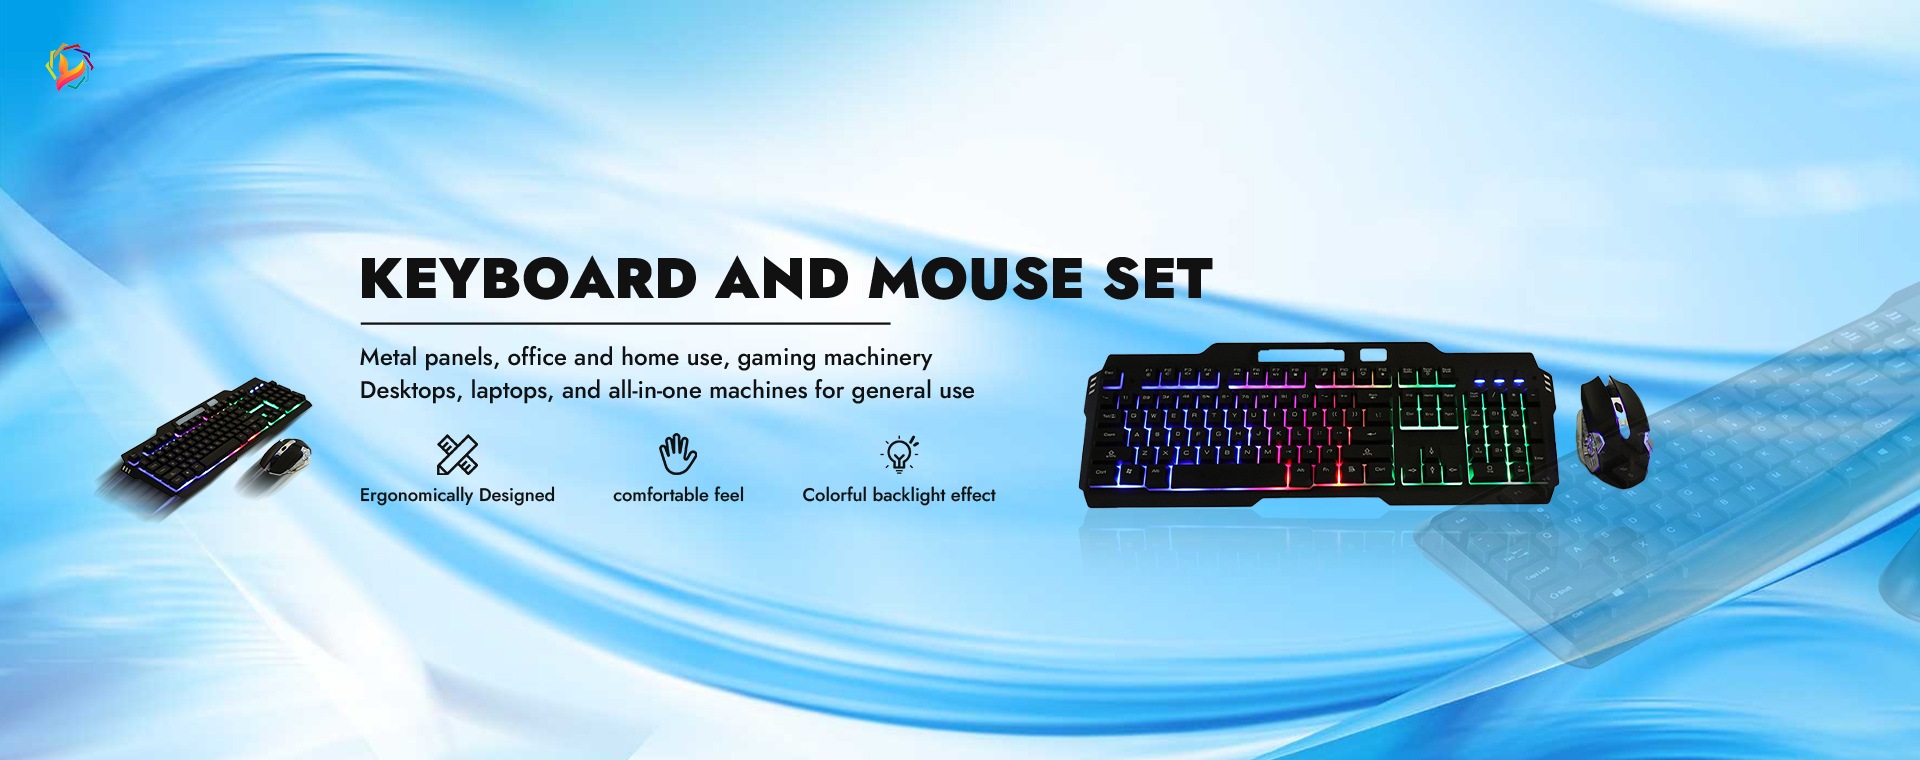 banner-keyboard and mouse